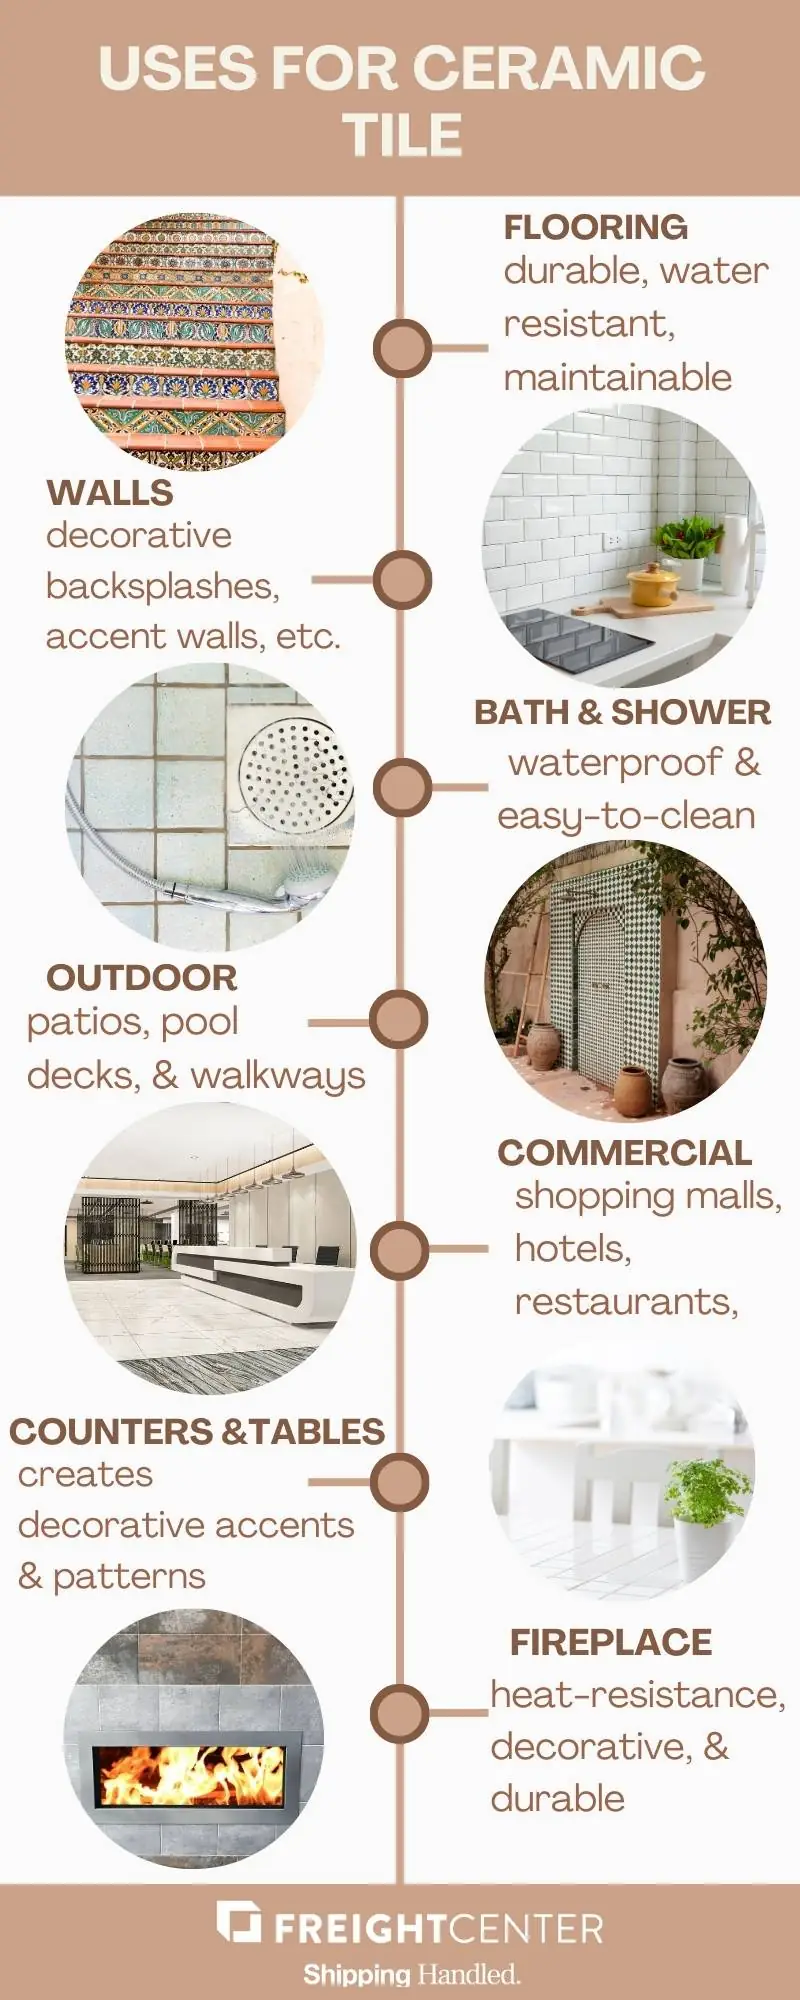 uses for ceramic tile infographic